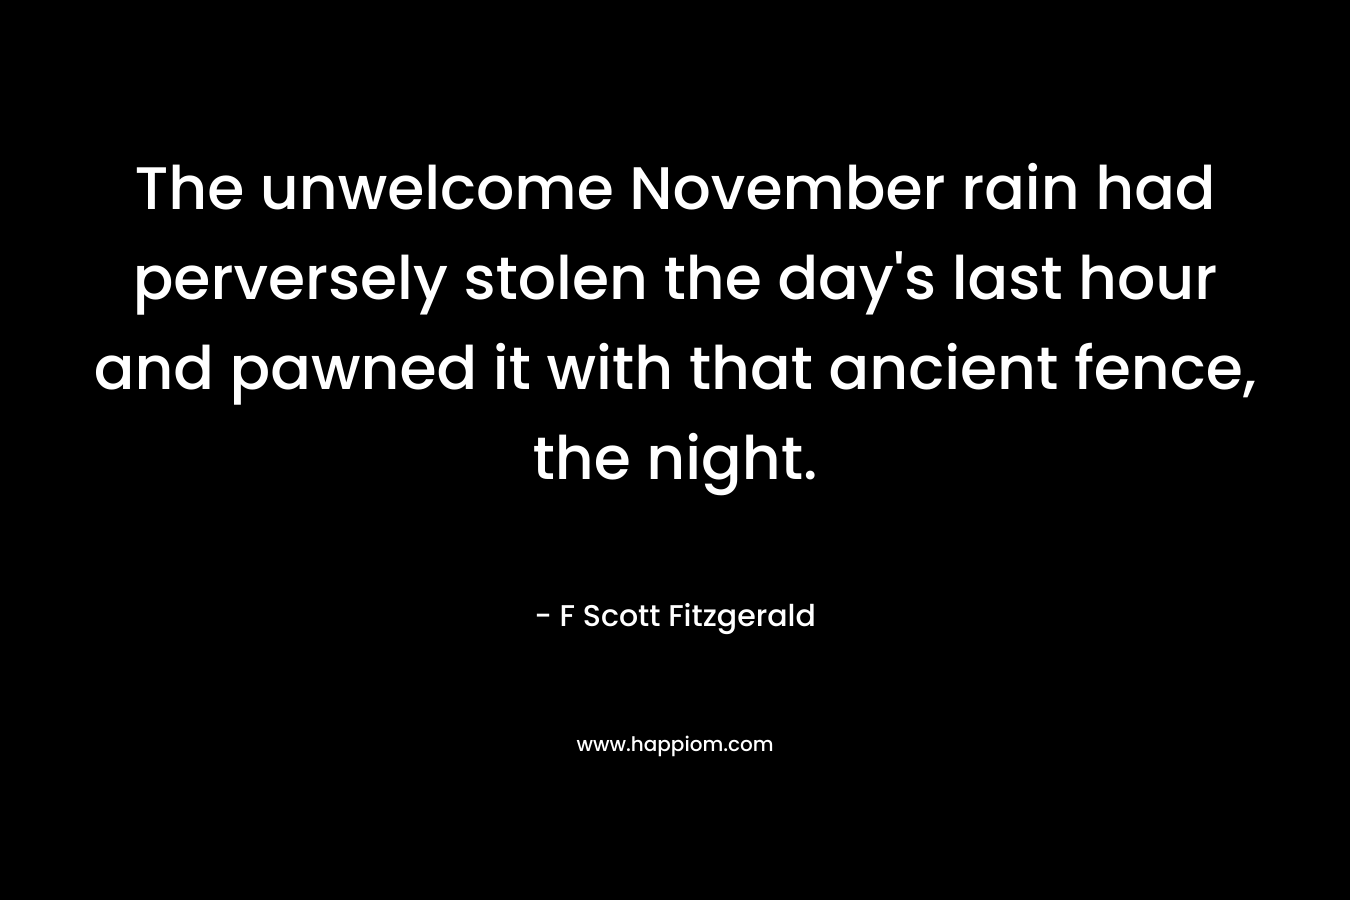 The unwelcome November rain had perversely stolen the day's last hour and pawned it with that ancient fence, the night.